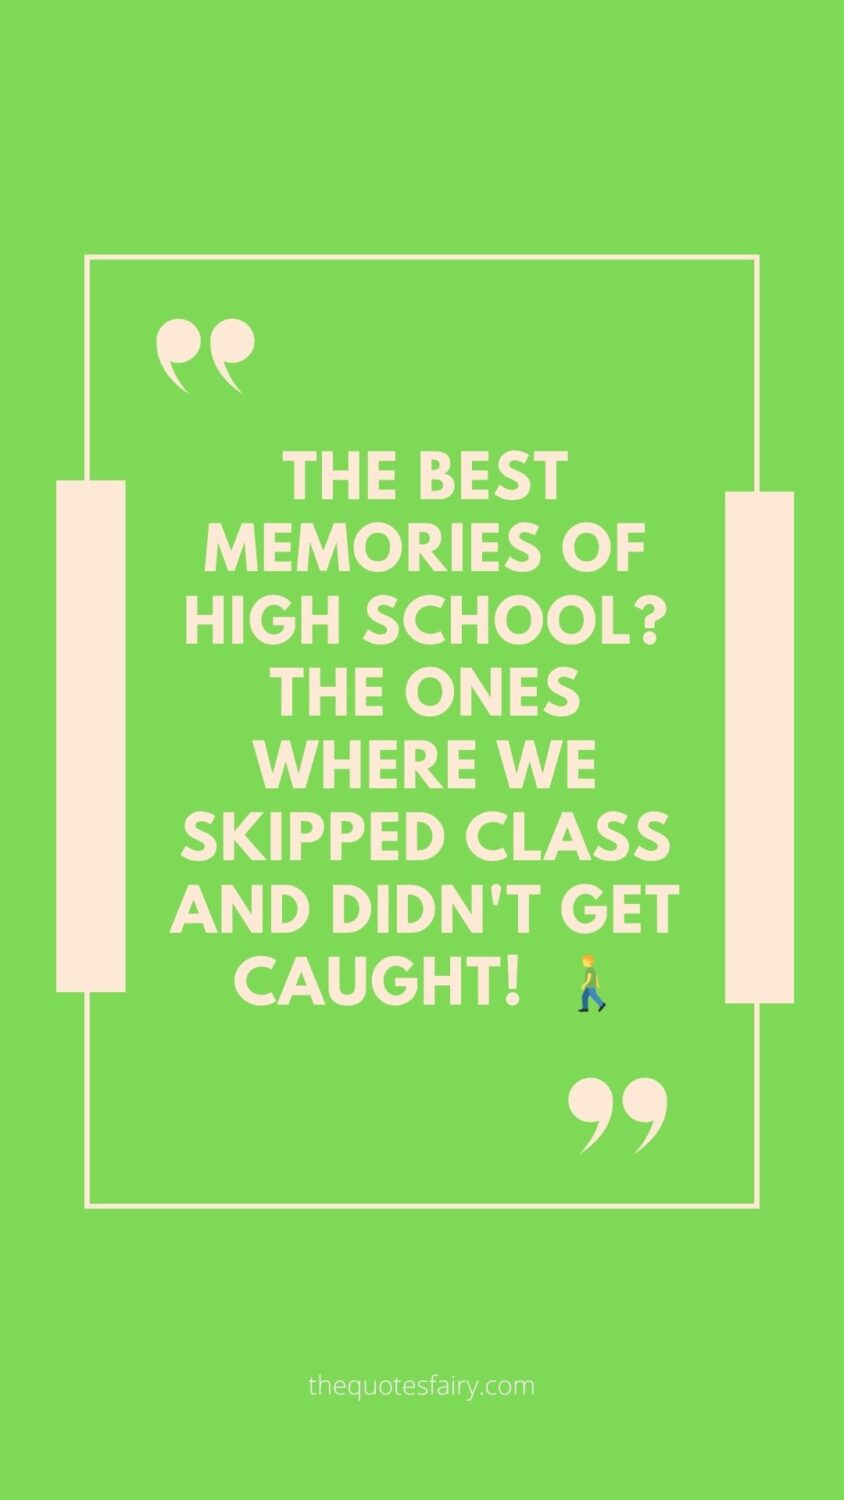 With these high school memories quotes, they will jog your memory and take you back to a simpler time, where bills, drop offs, groceries and adulting was just not our priority. #takemebacktothegoodolddays